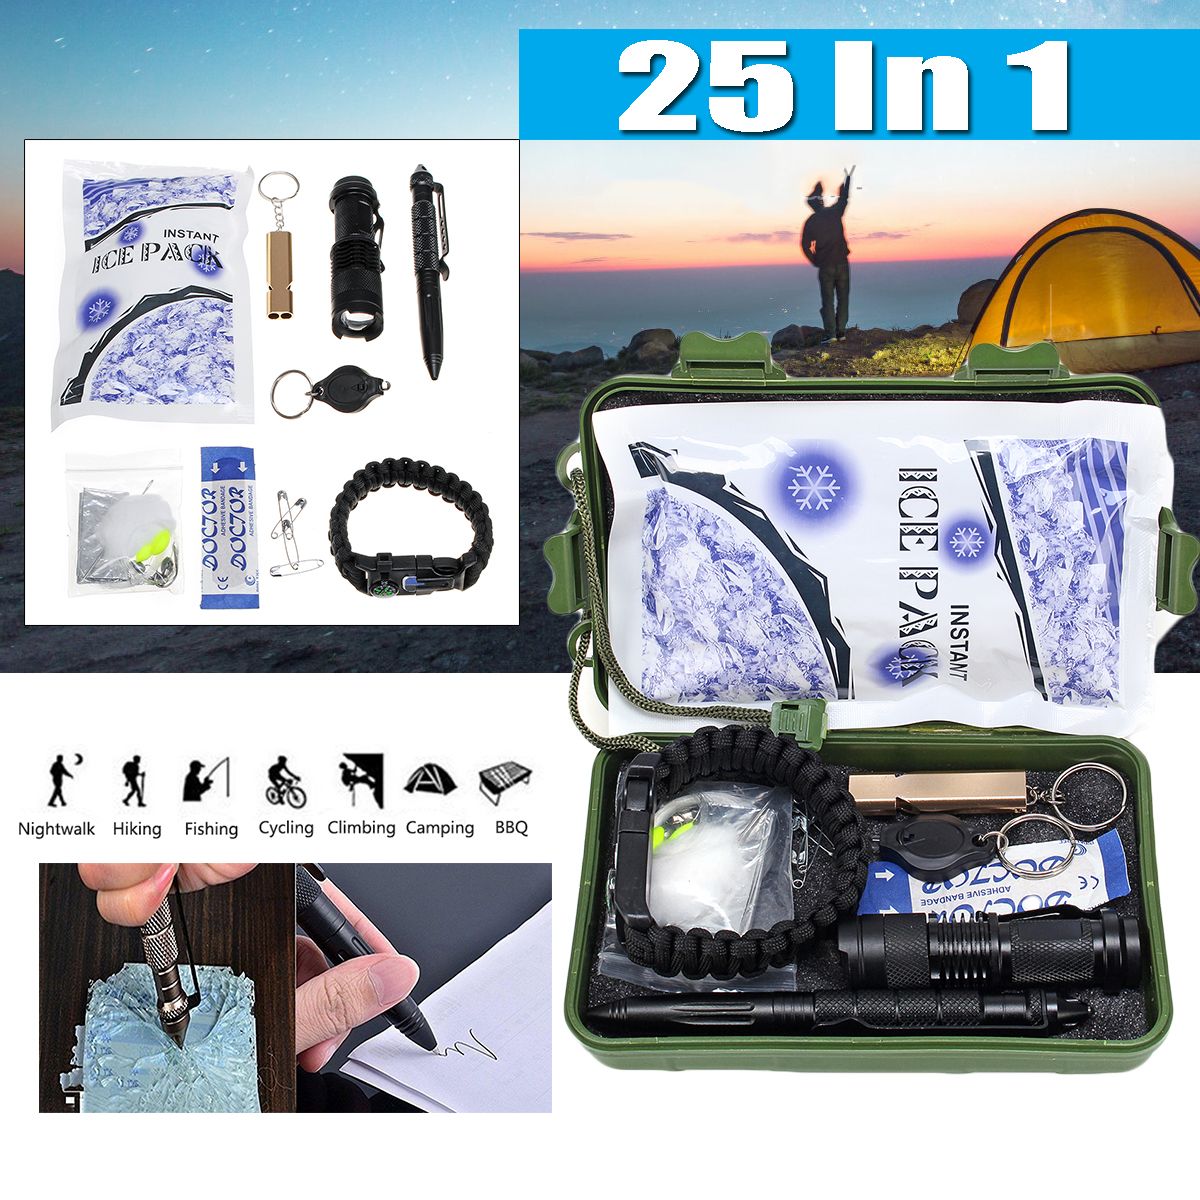 25-in-1-SOS-Emergency-Camping-Survival-Equipment-Tools-Kit-Outdoor-Gear-Tactical-Tool-1415269